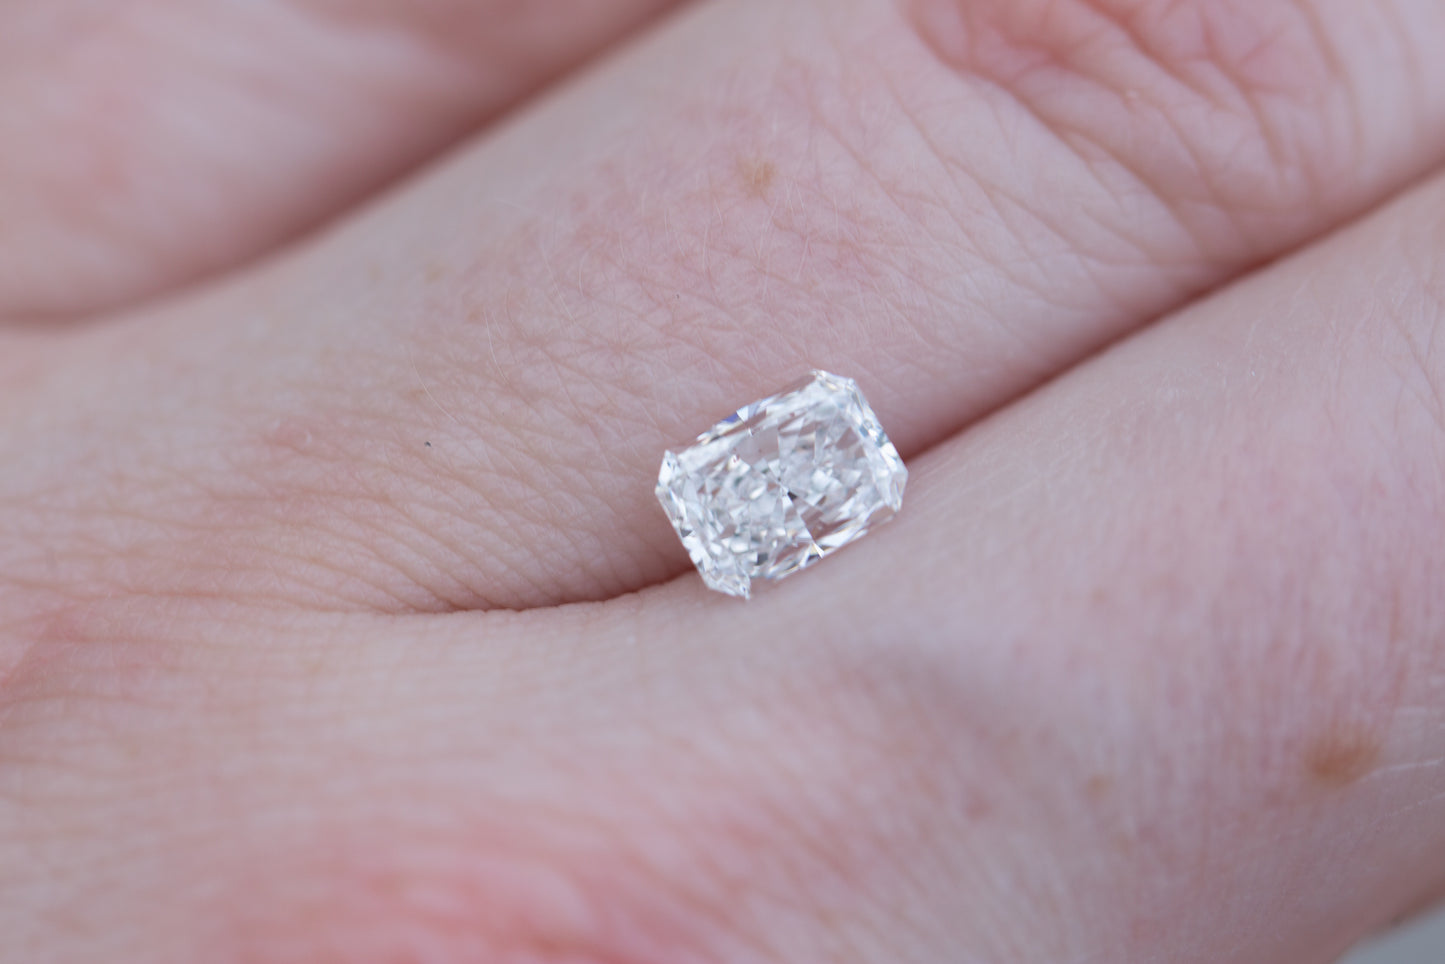 Load image into Gallery viewer, 1.24ct radiant cut lab diamond, D/VVS2
